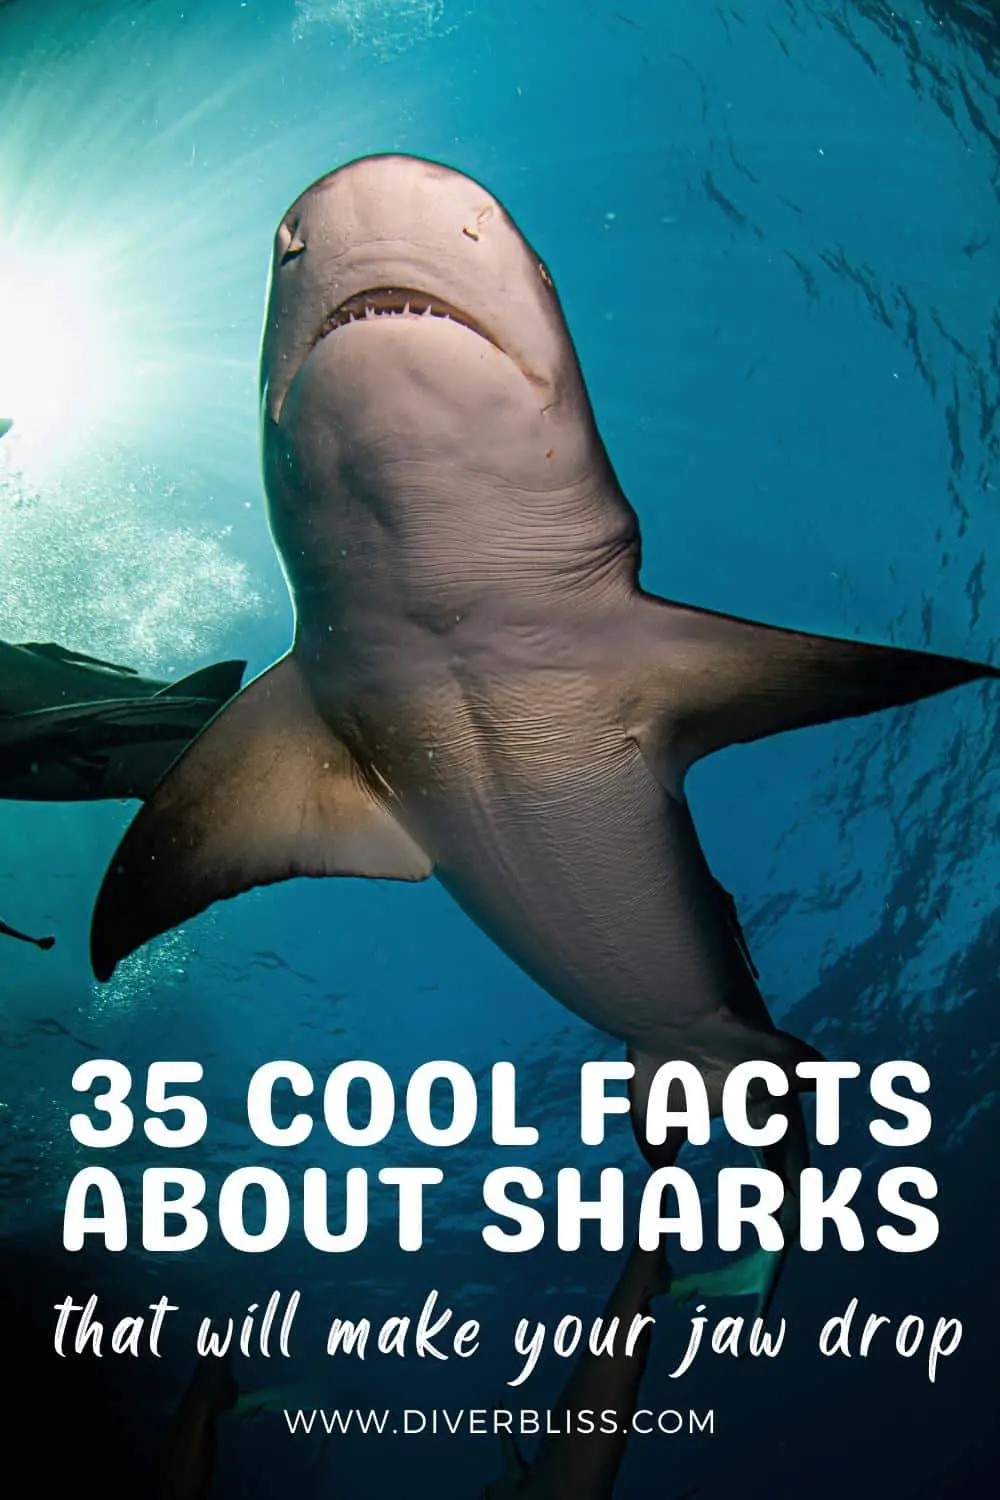 35 cool facts about sharks that will make your jaw drop